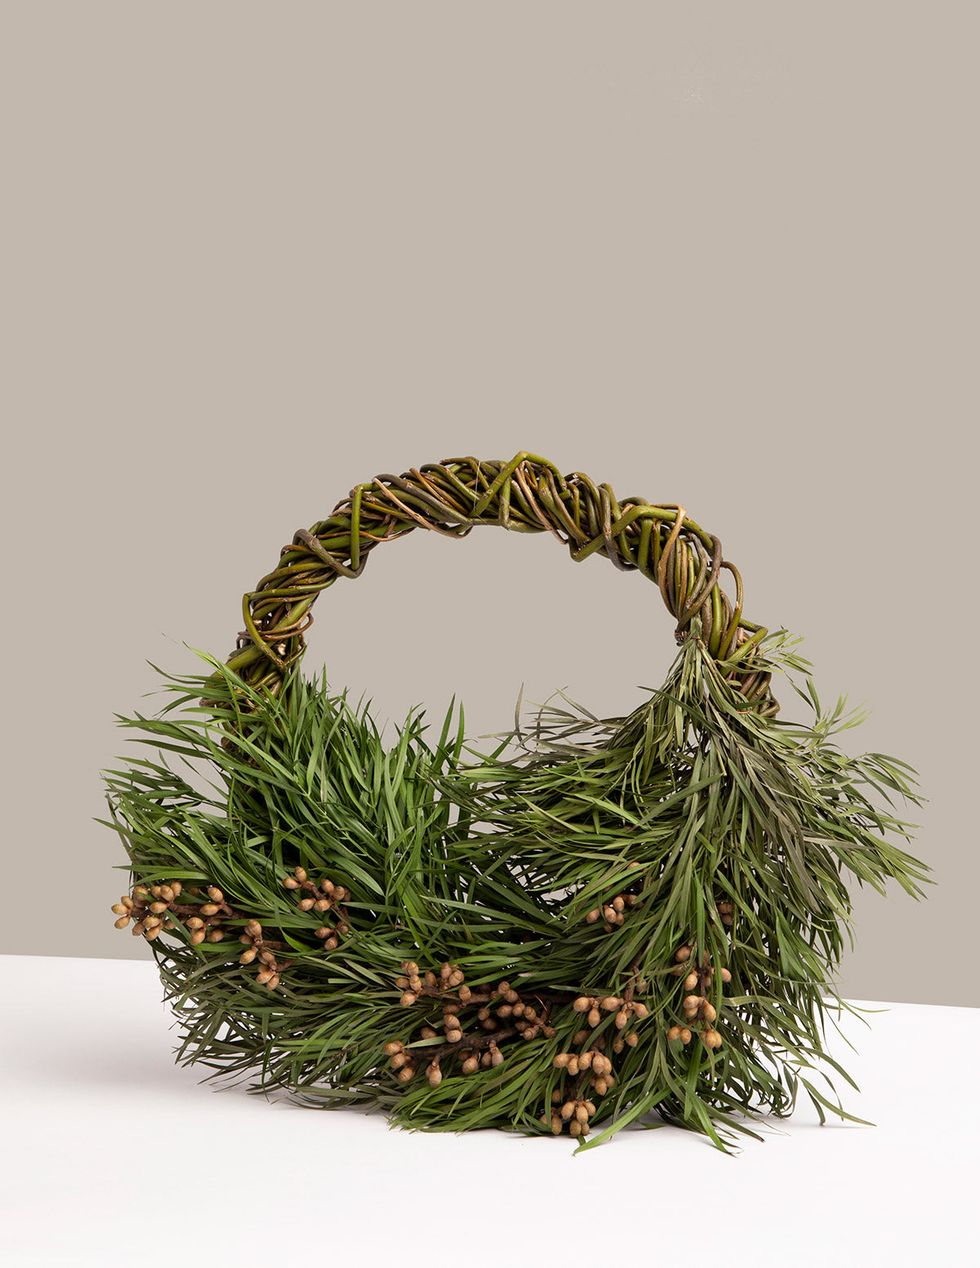 Wisping Willow Wreath